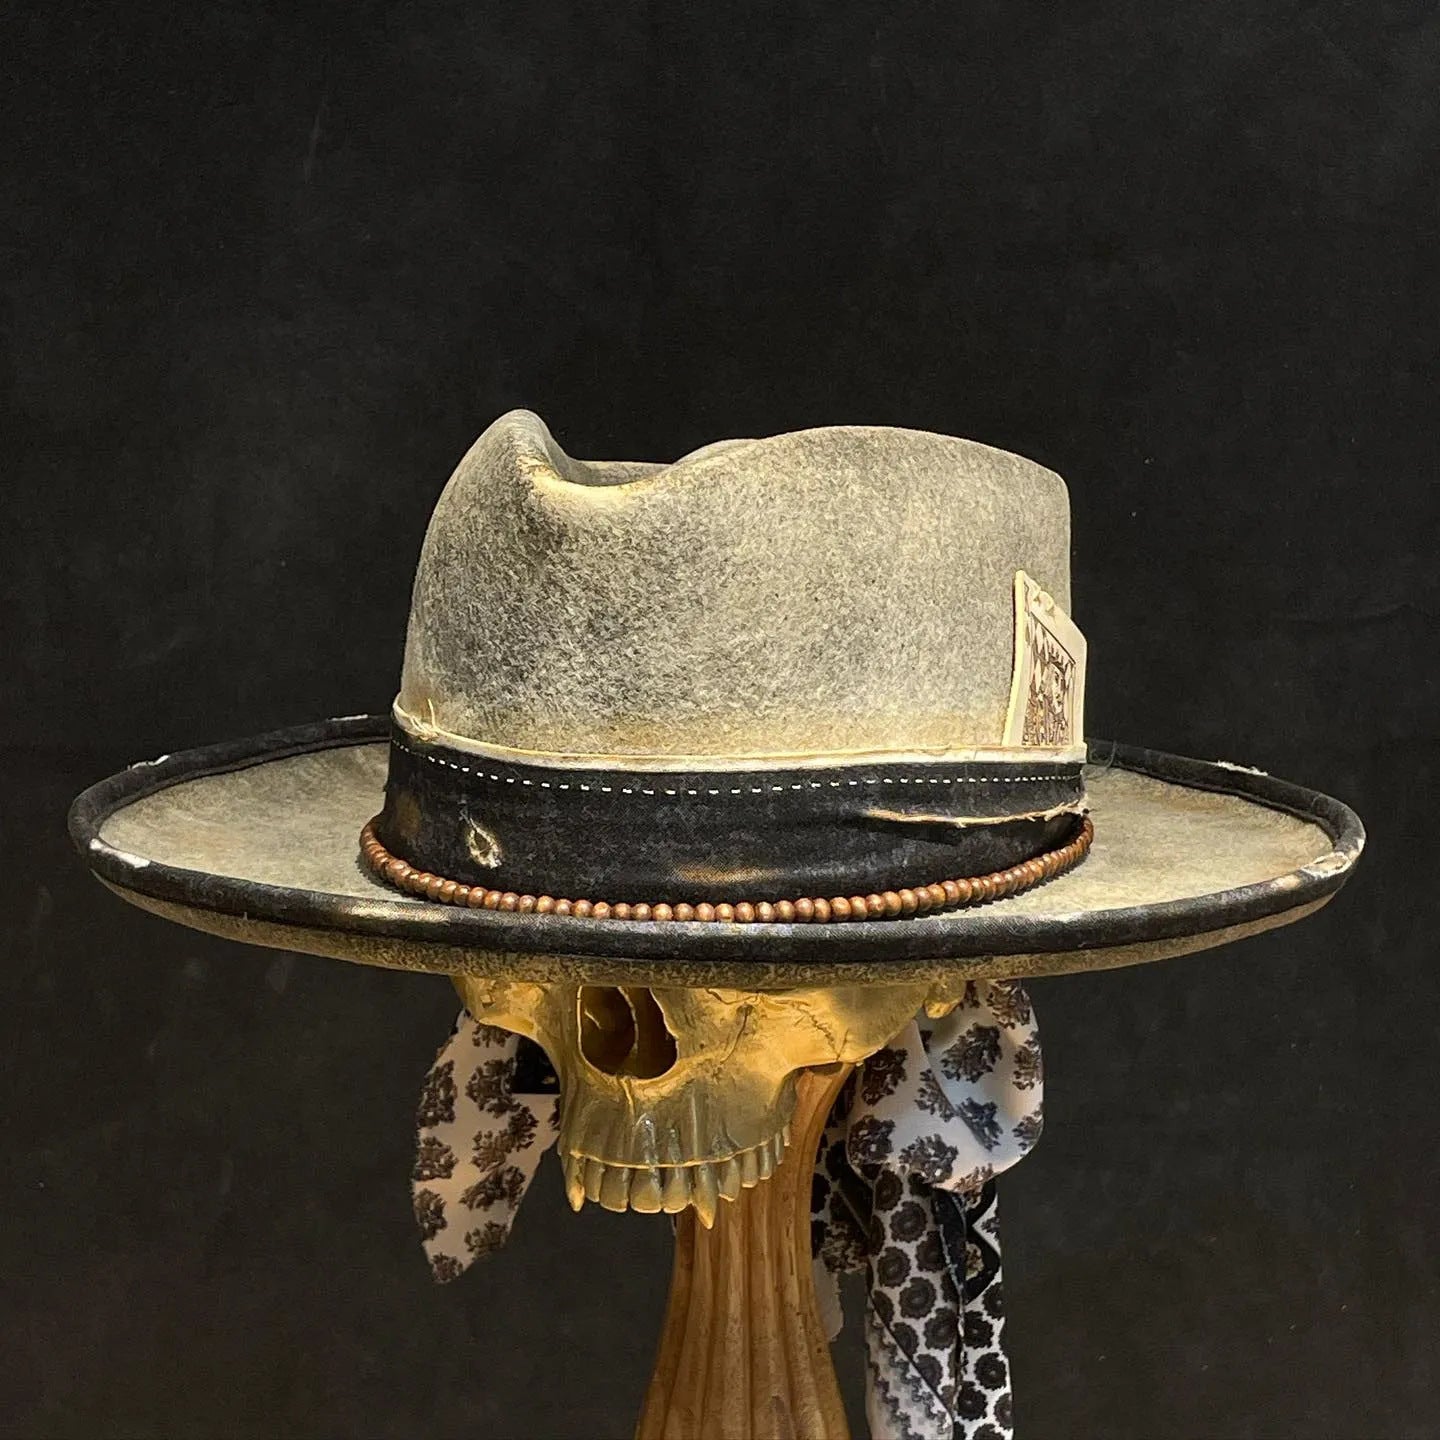 Distressed Fedora with Unique Grey Edge Design Incorporating Black and Brown Stripes White Poker Tag on Top